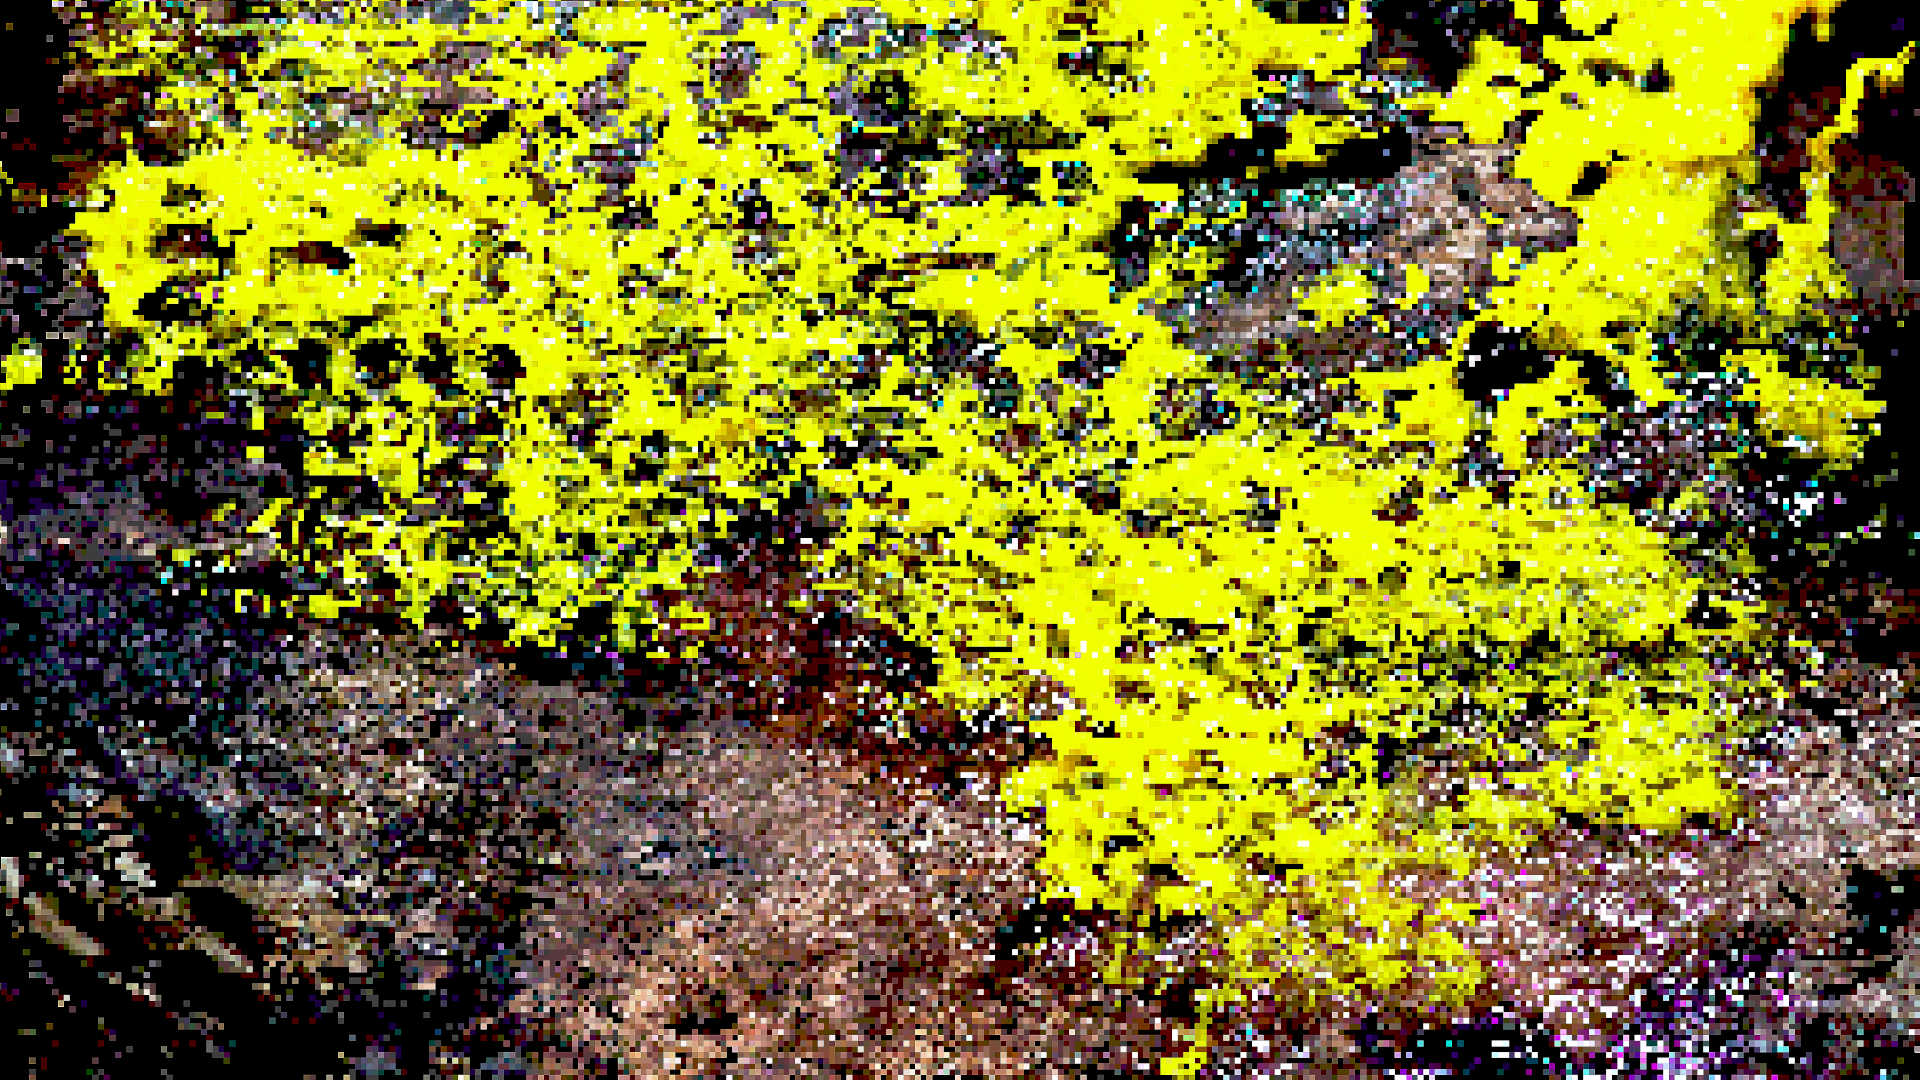 A pixelated image of what appears to be digital slime mould growing over a surface, from Patrick Hase & Asher Elazary's Object Animacy